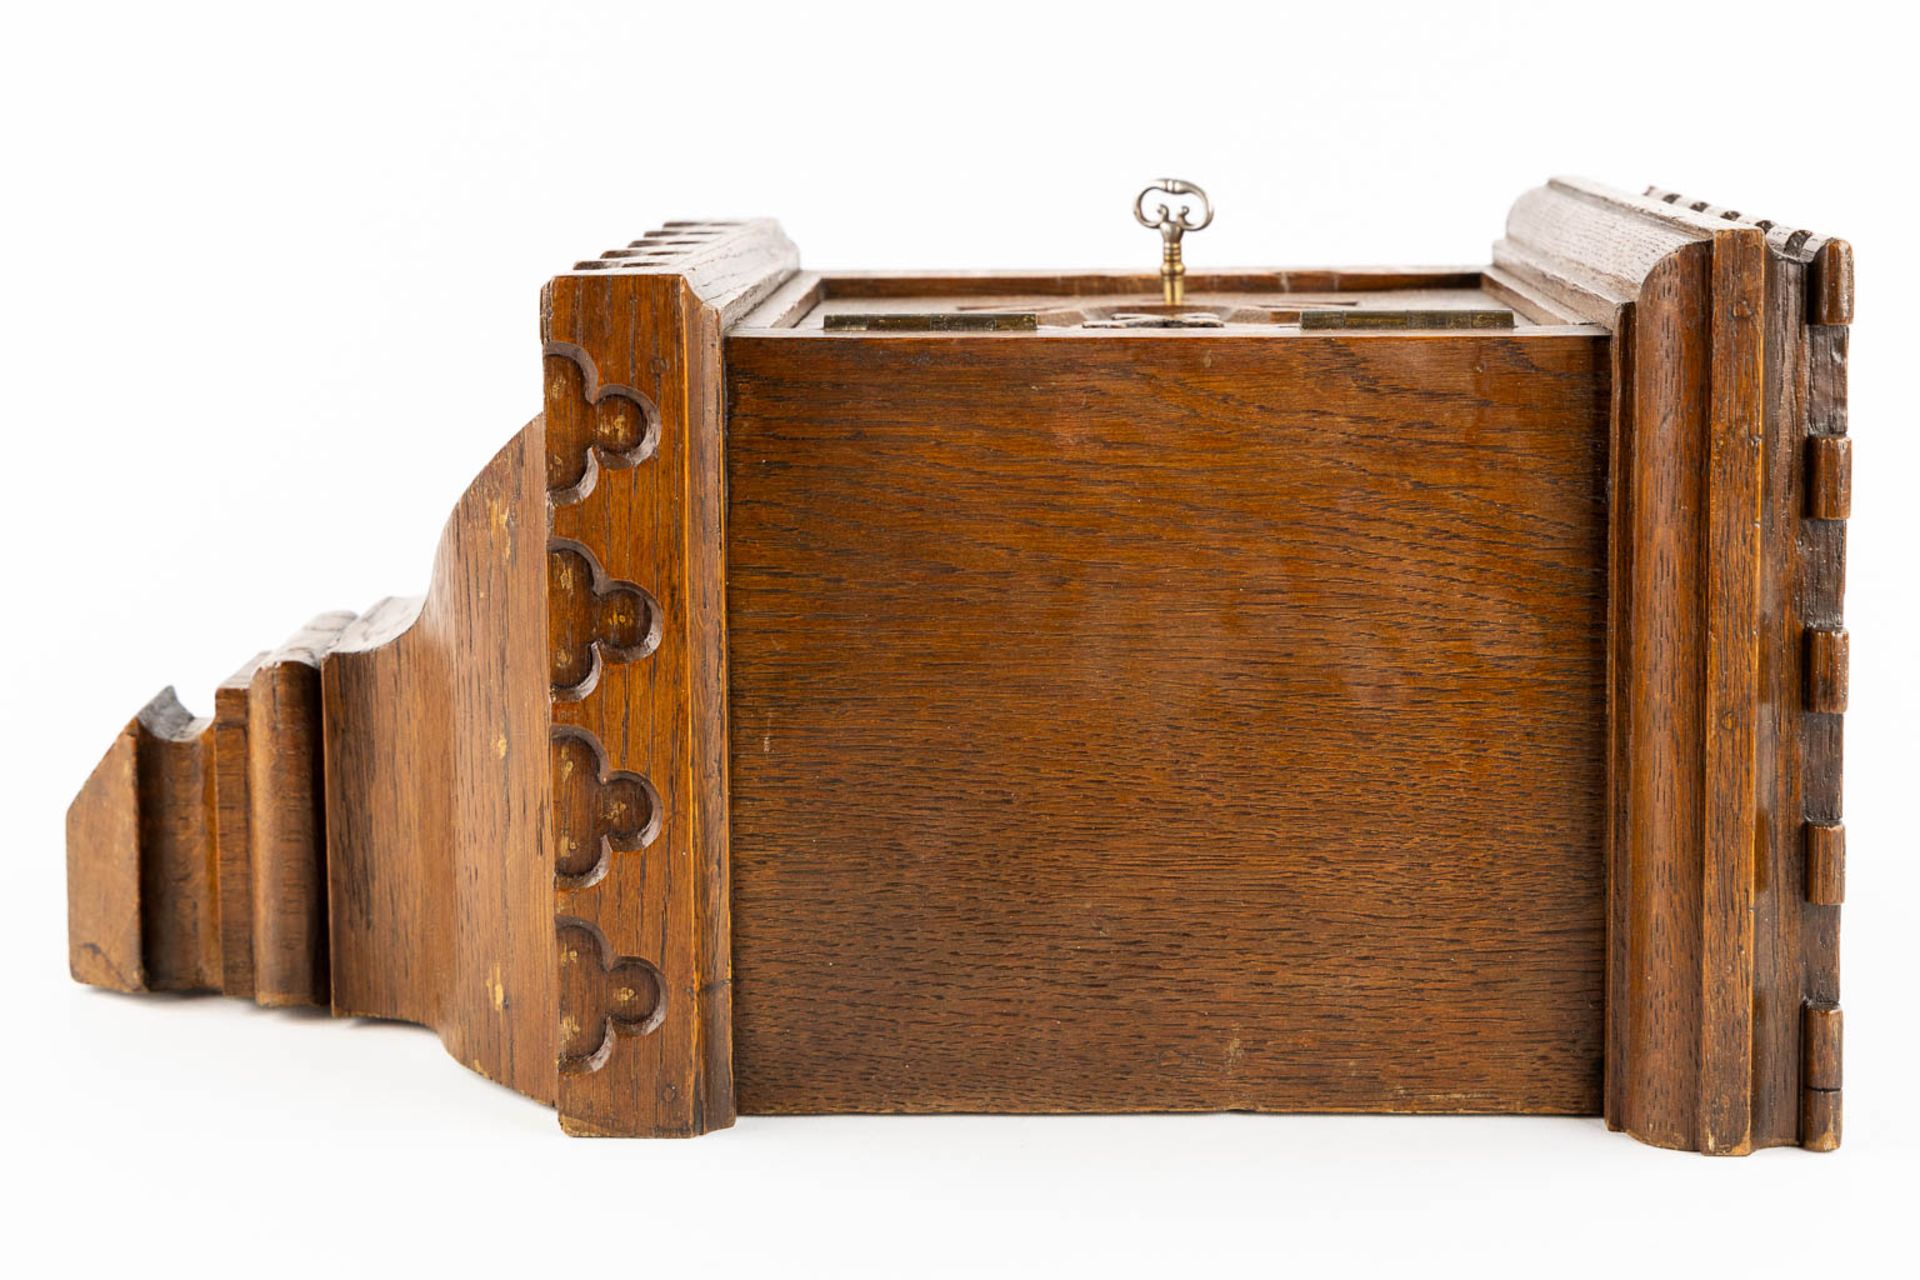 An Offertory or Poor box, sculptured oak, gothic revival. (L:20 x W:27 x H:42 cm) - Image 8 of 11